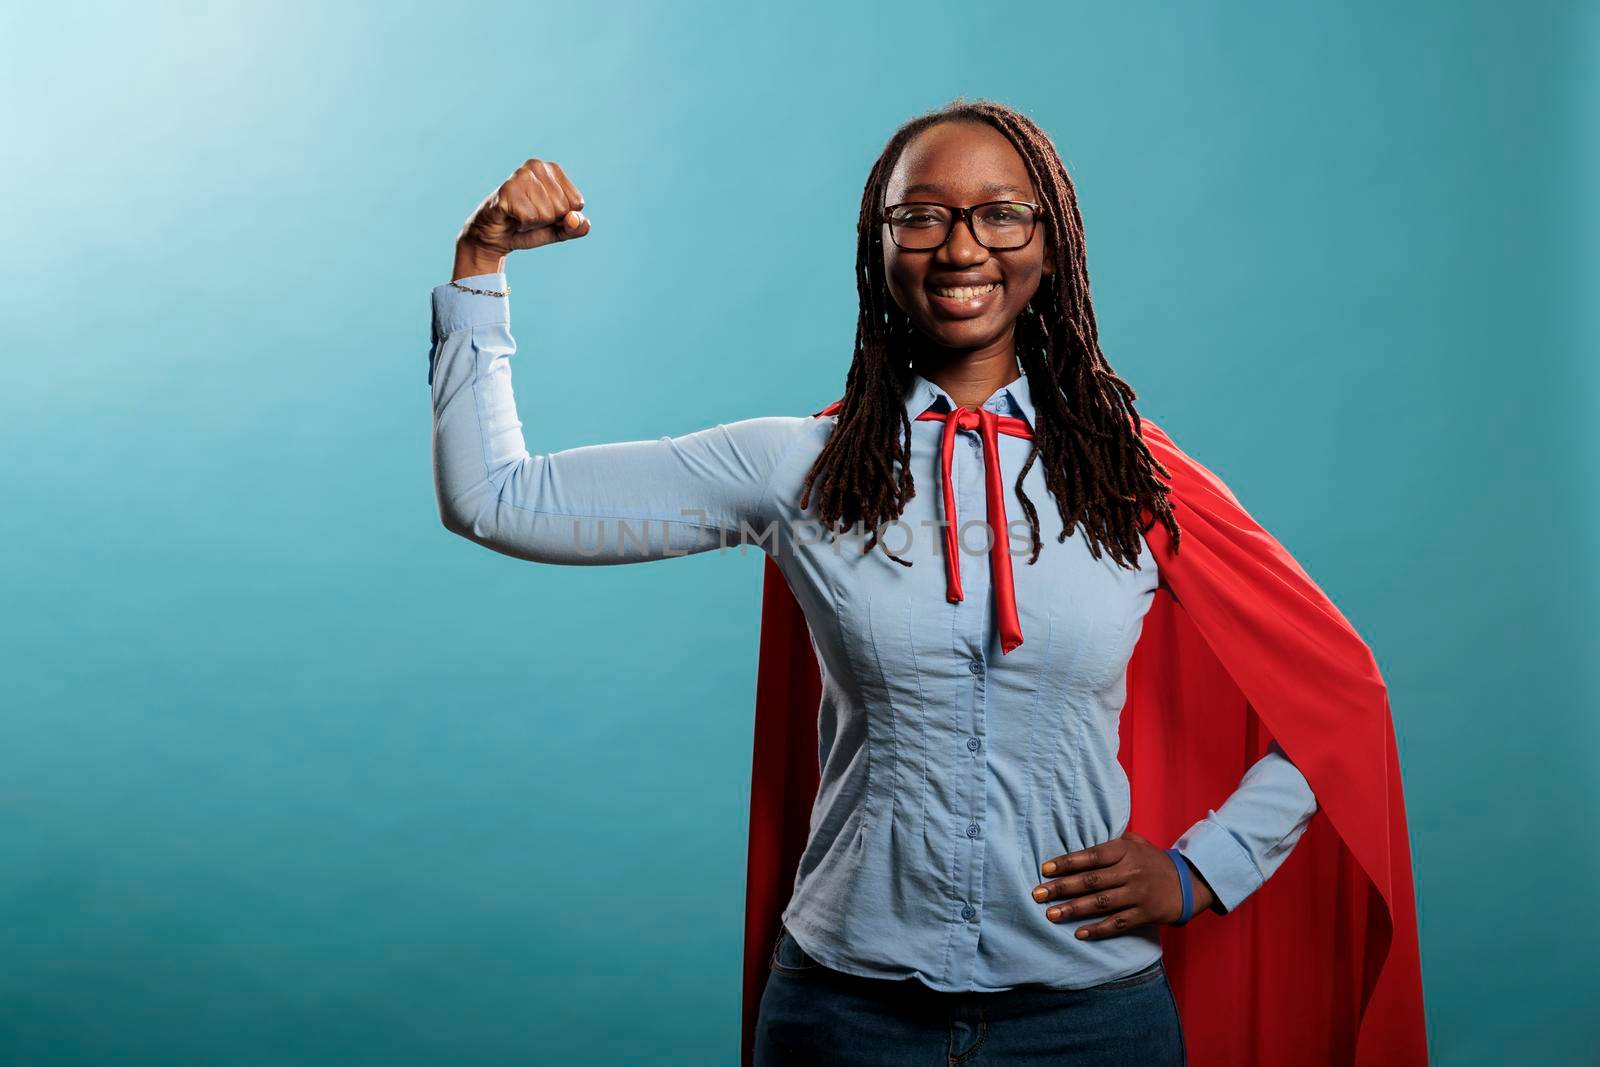 Arms muscle flexing brave superhero woman posing strong and tough for camera on blue background. Justice defender wearing mighty hero red cape while expressing empowerement. Studio shot.